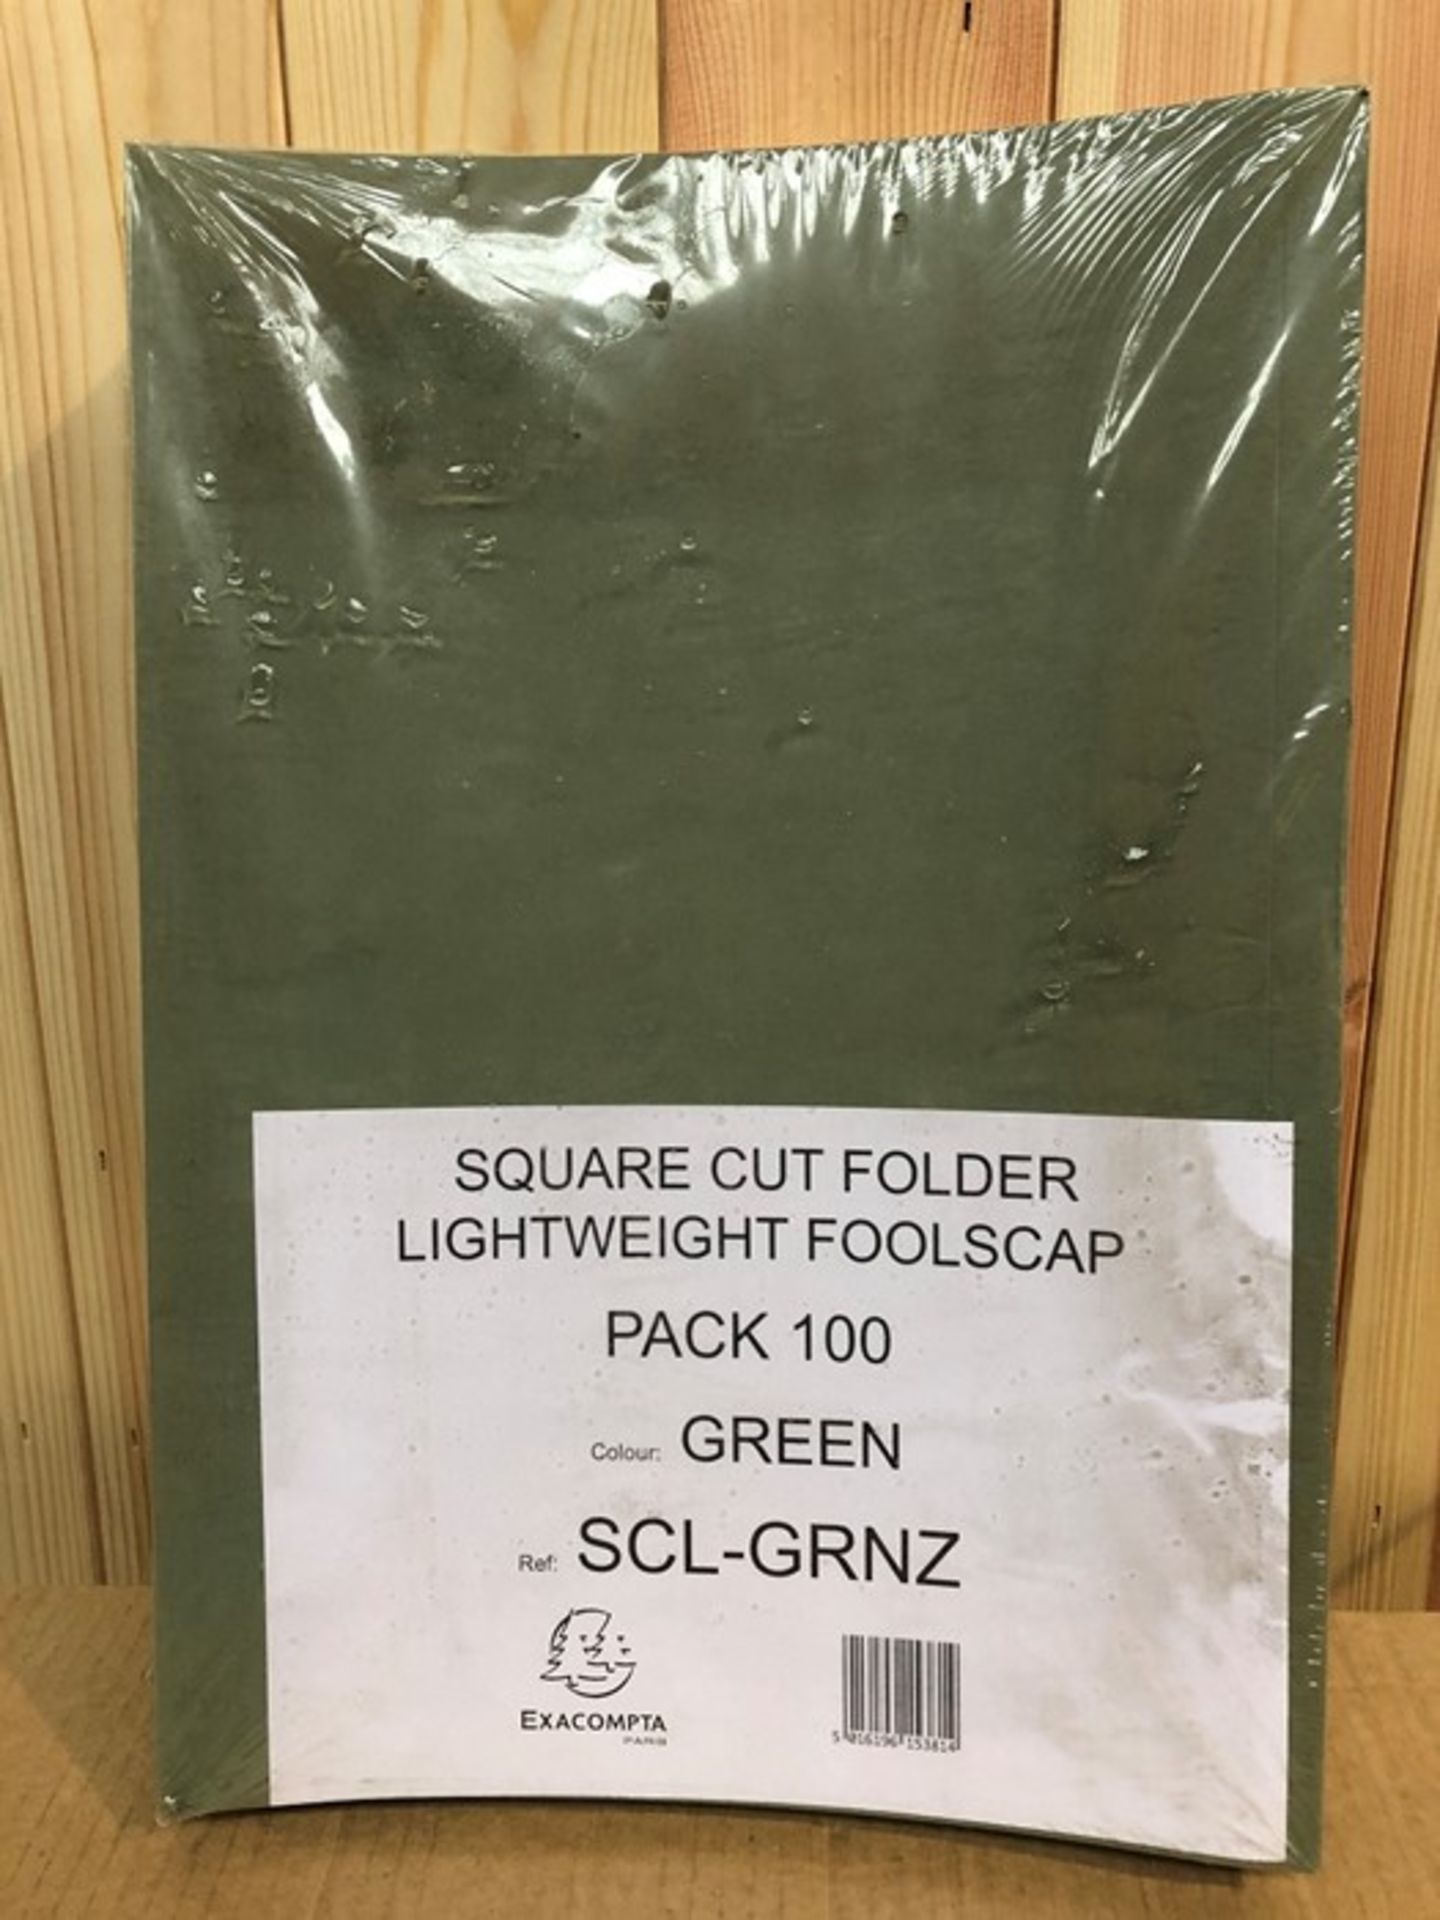 1 PACK OF SQUARE CUT FOLDER LIGHTWEIGHT IN GREEN - 1 PACK CONTAINS 100 FOLDERS (PUBLIC VIEWING